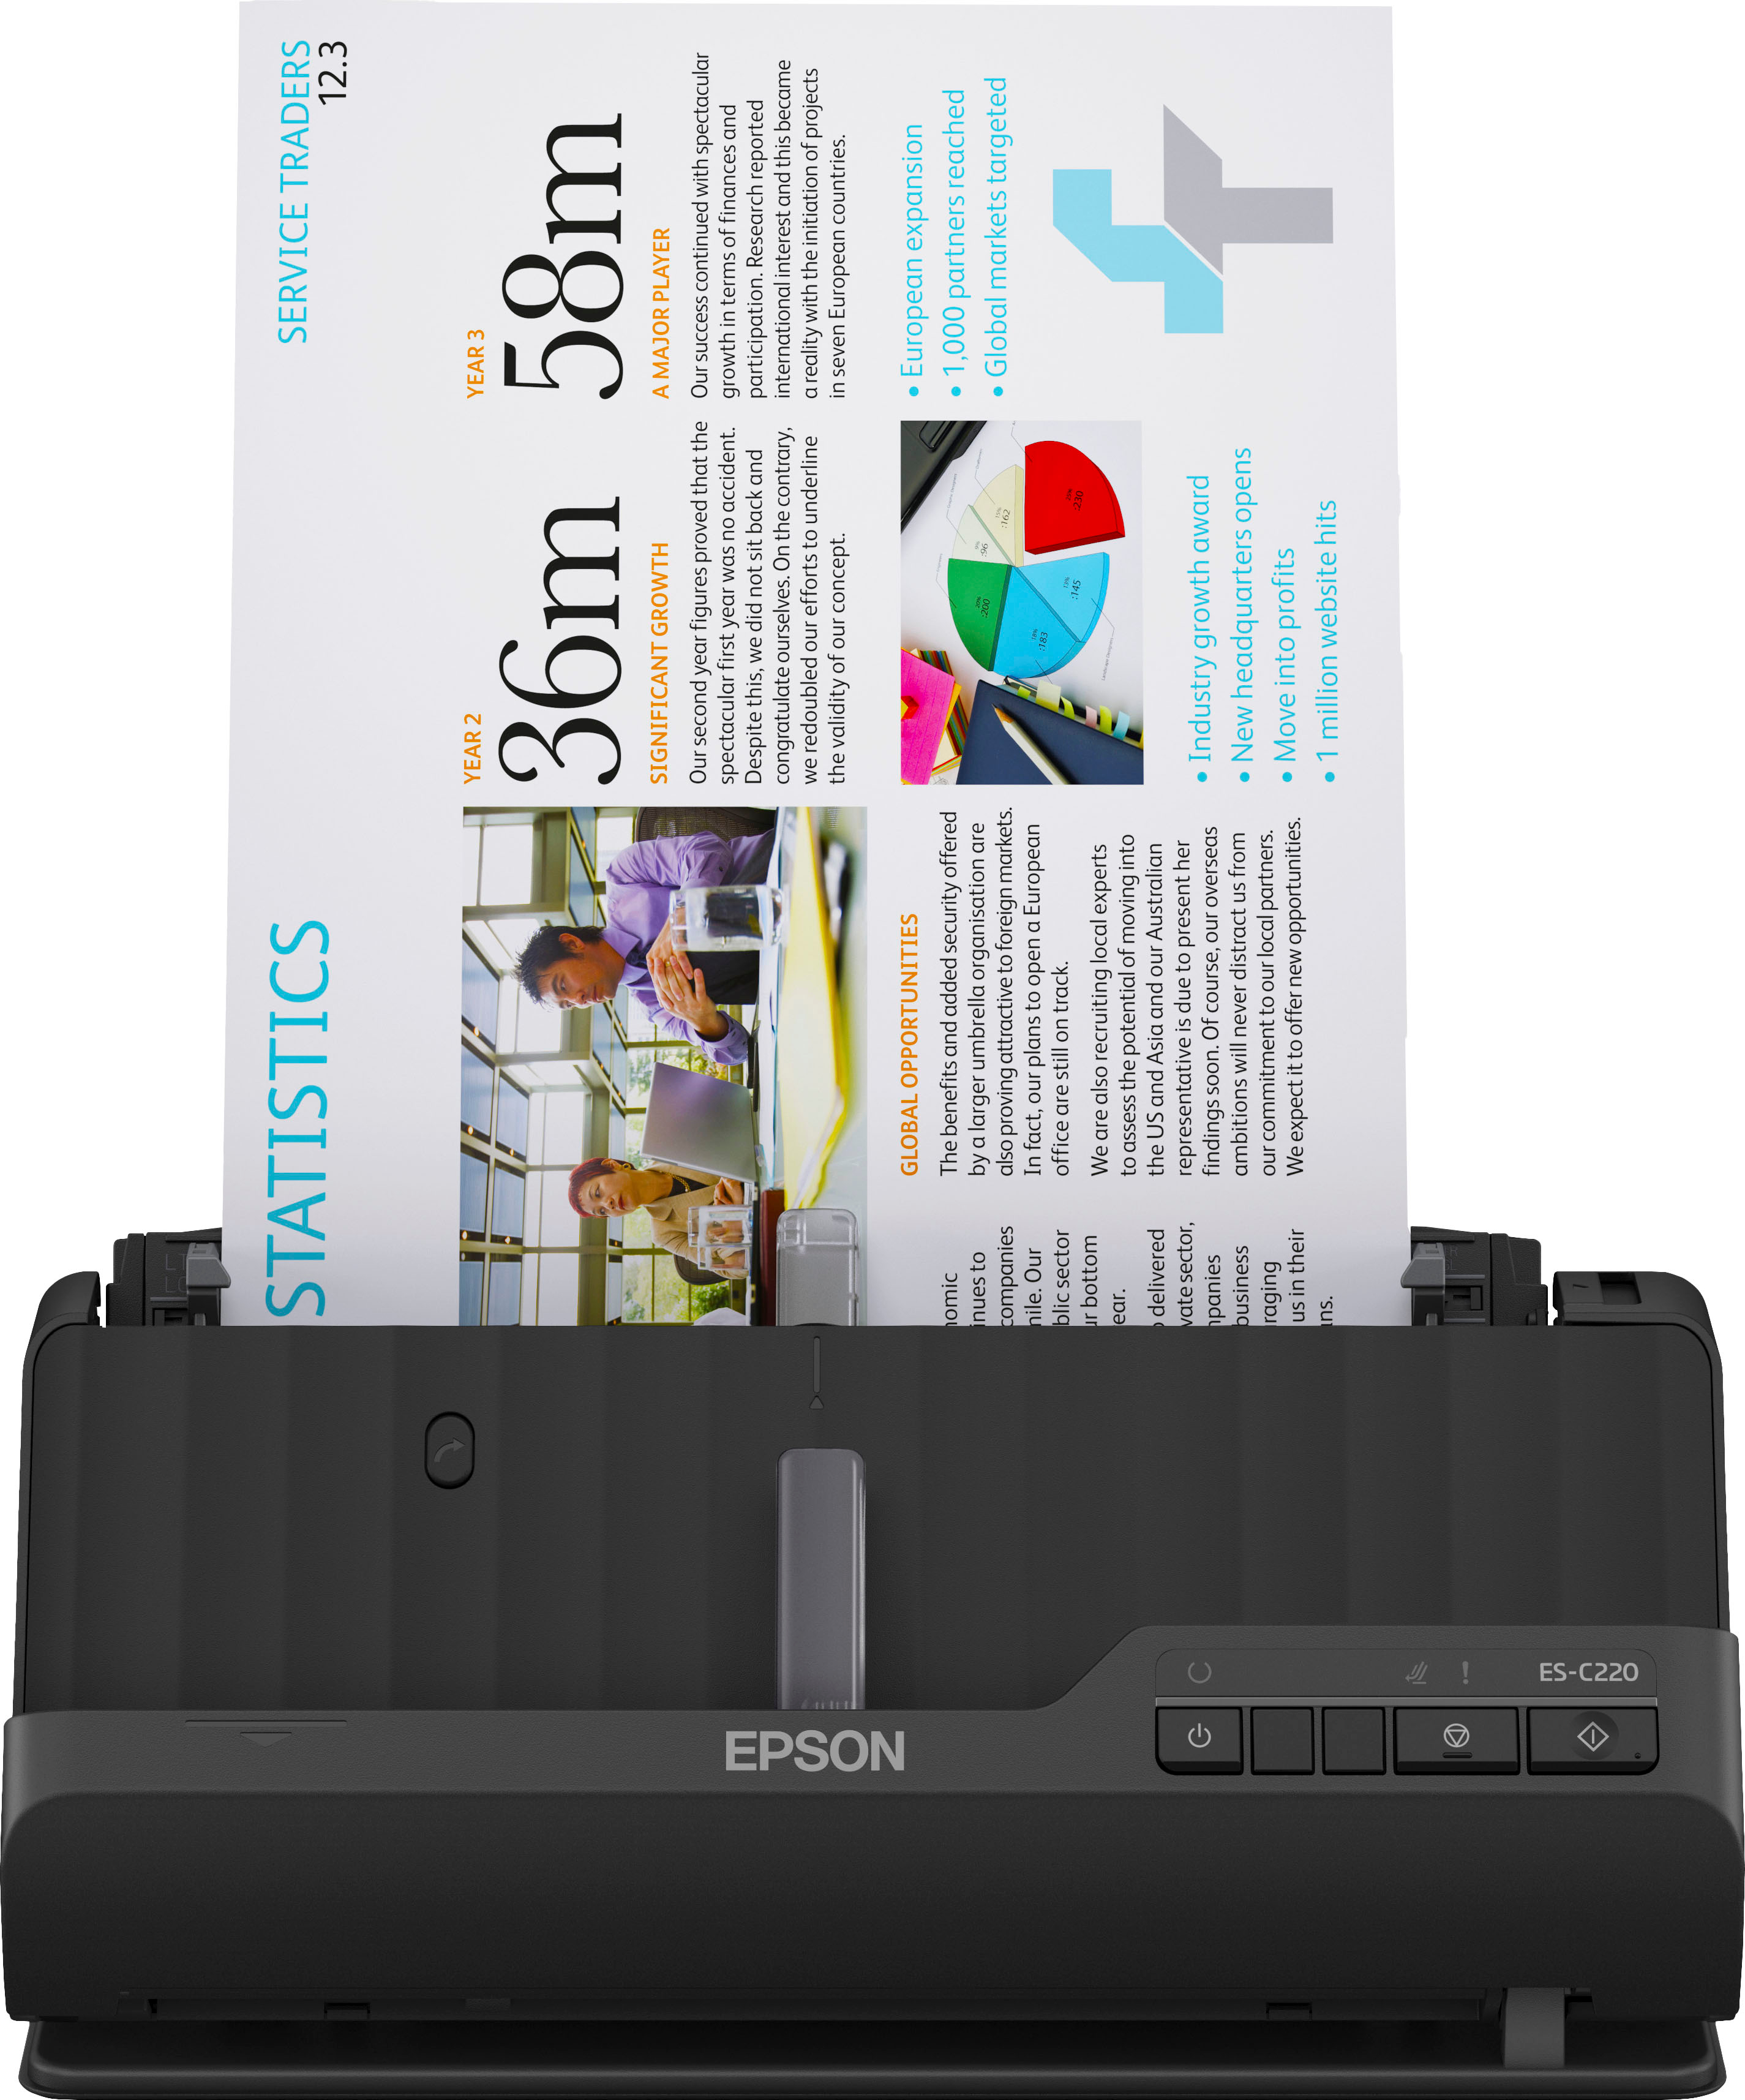 Epson Introduces New Document Scanner with Built-In Networking